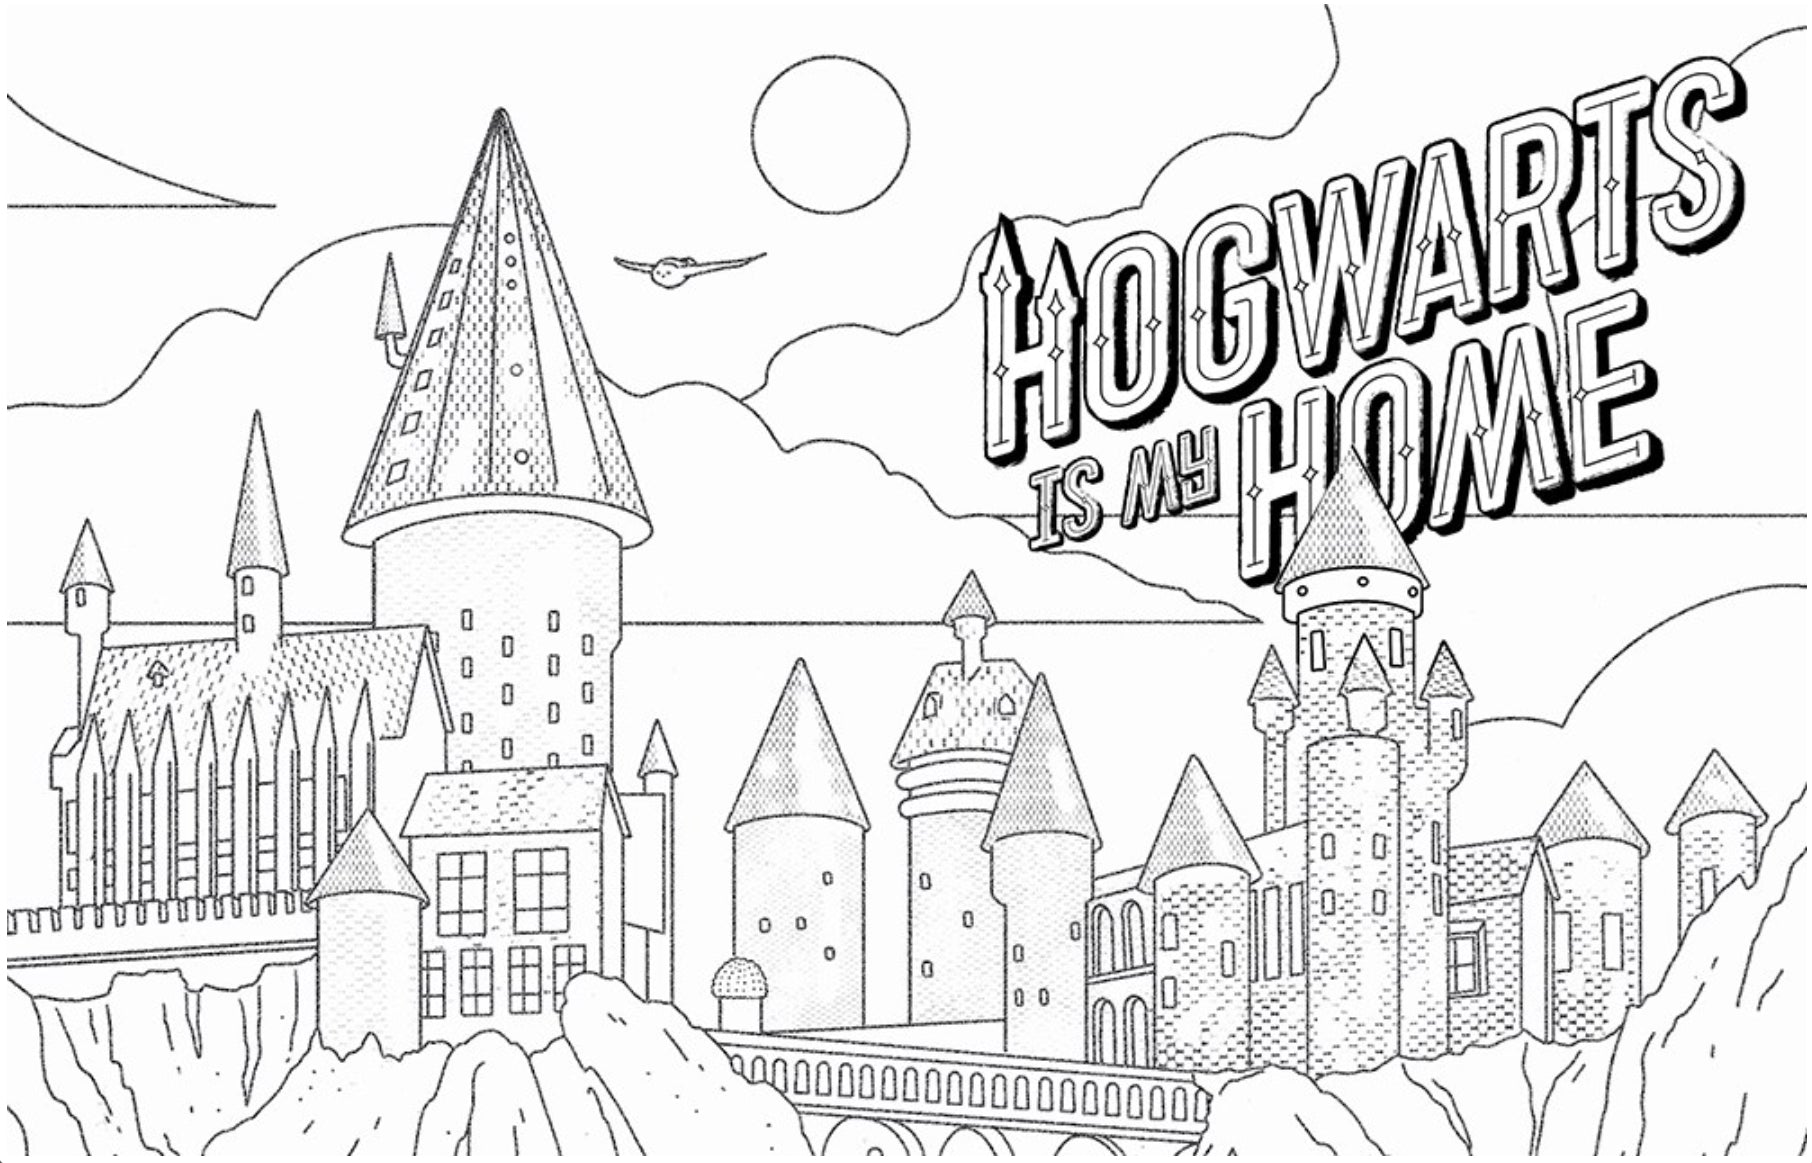 Harry Potter: Magical Art Colouring Book [Book]